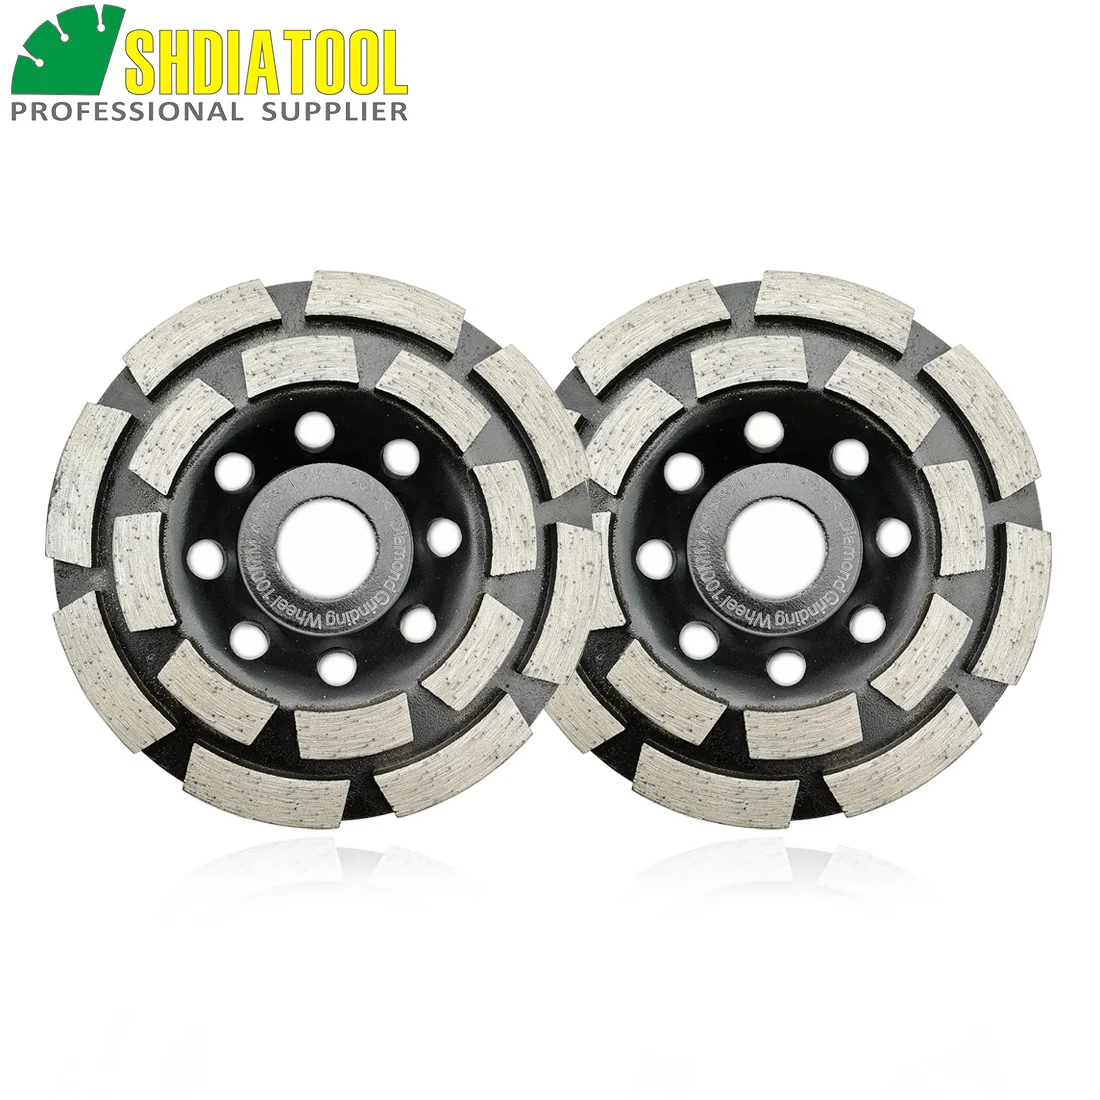 

SHDIATOOL 4 inch Diamond Double Row Grinding Cup Wheel 100MM Grinding disc bore 20mm/16mm